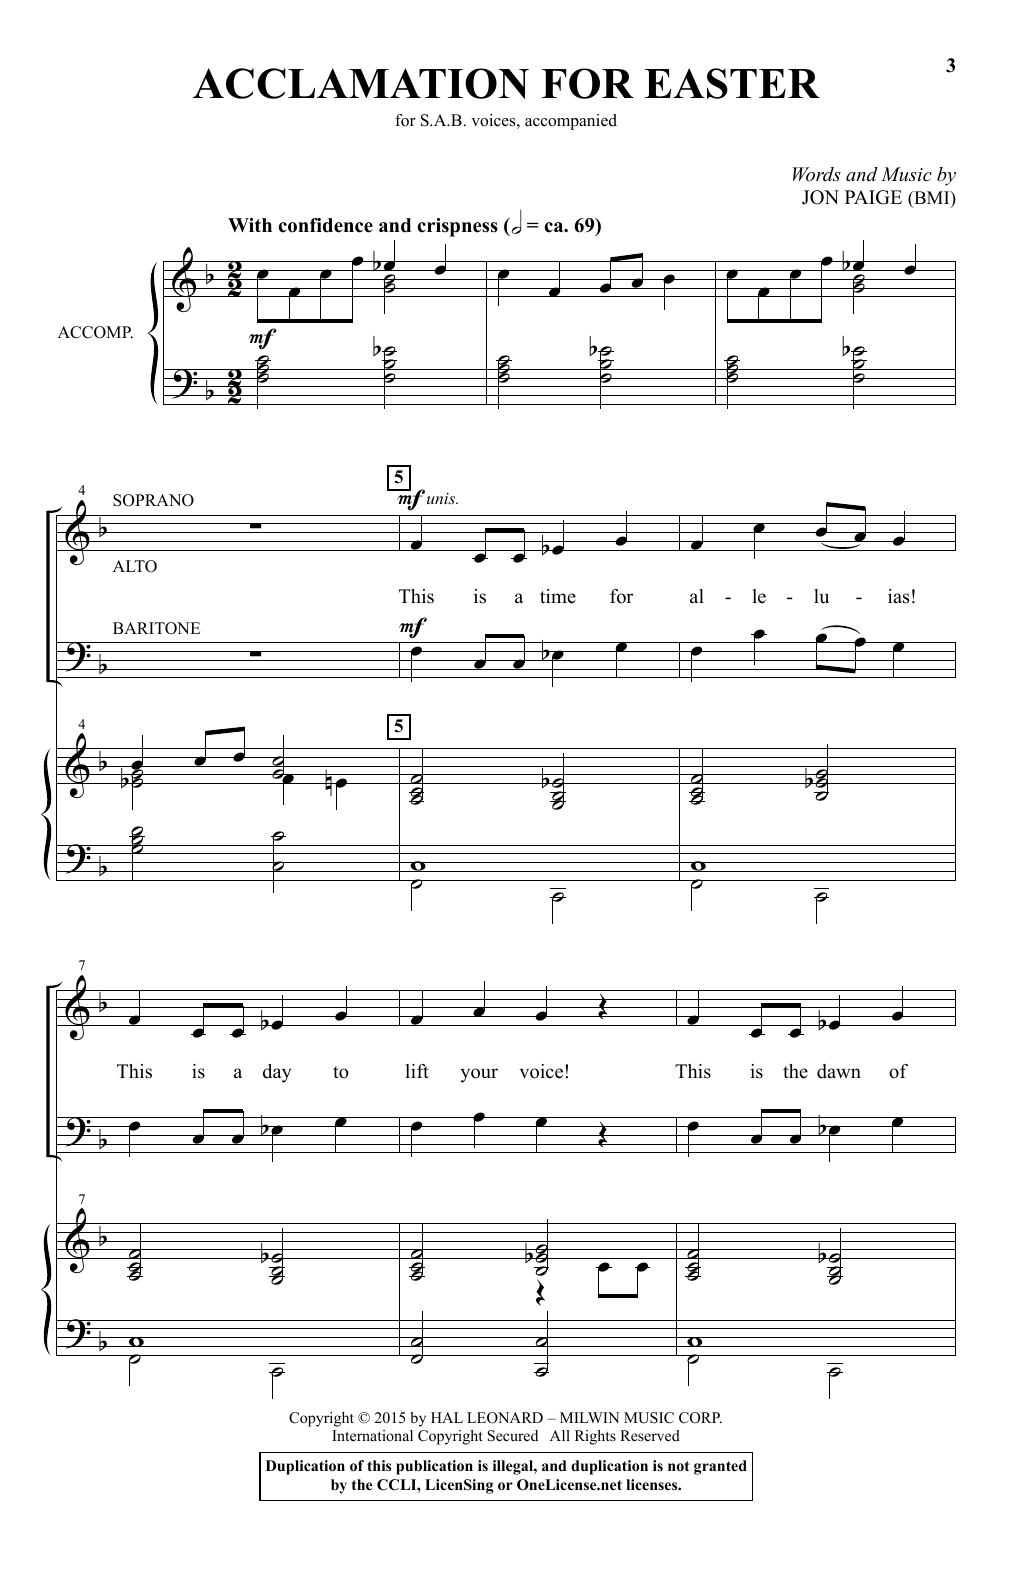 Download Jon Paige Acclamation For Easter Sheet Music